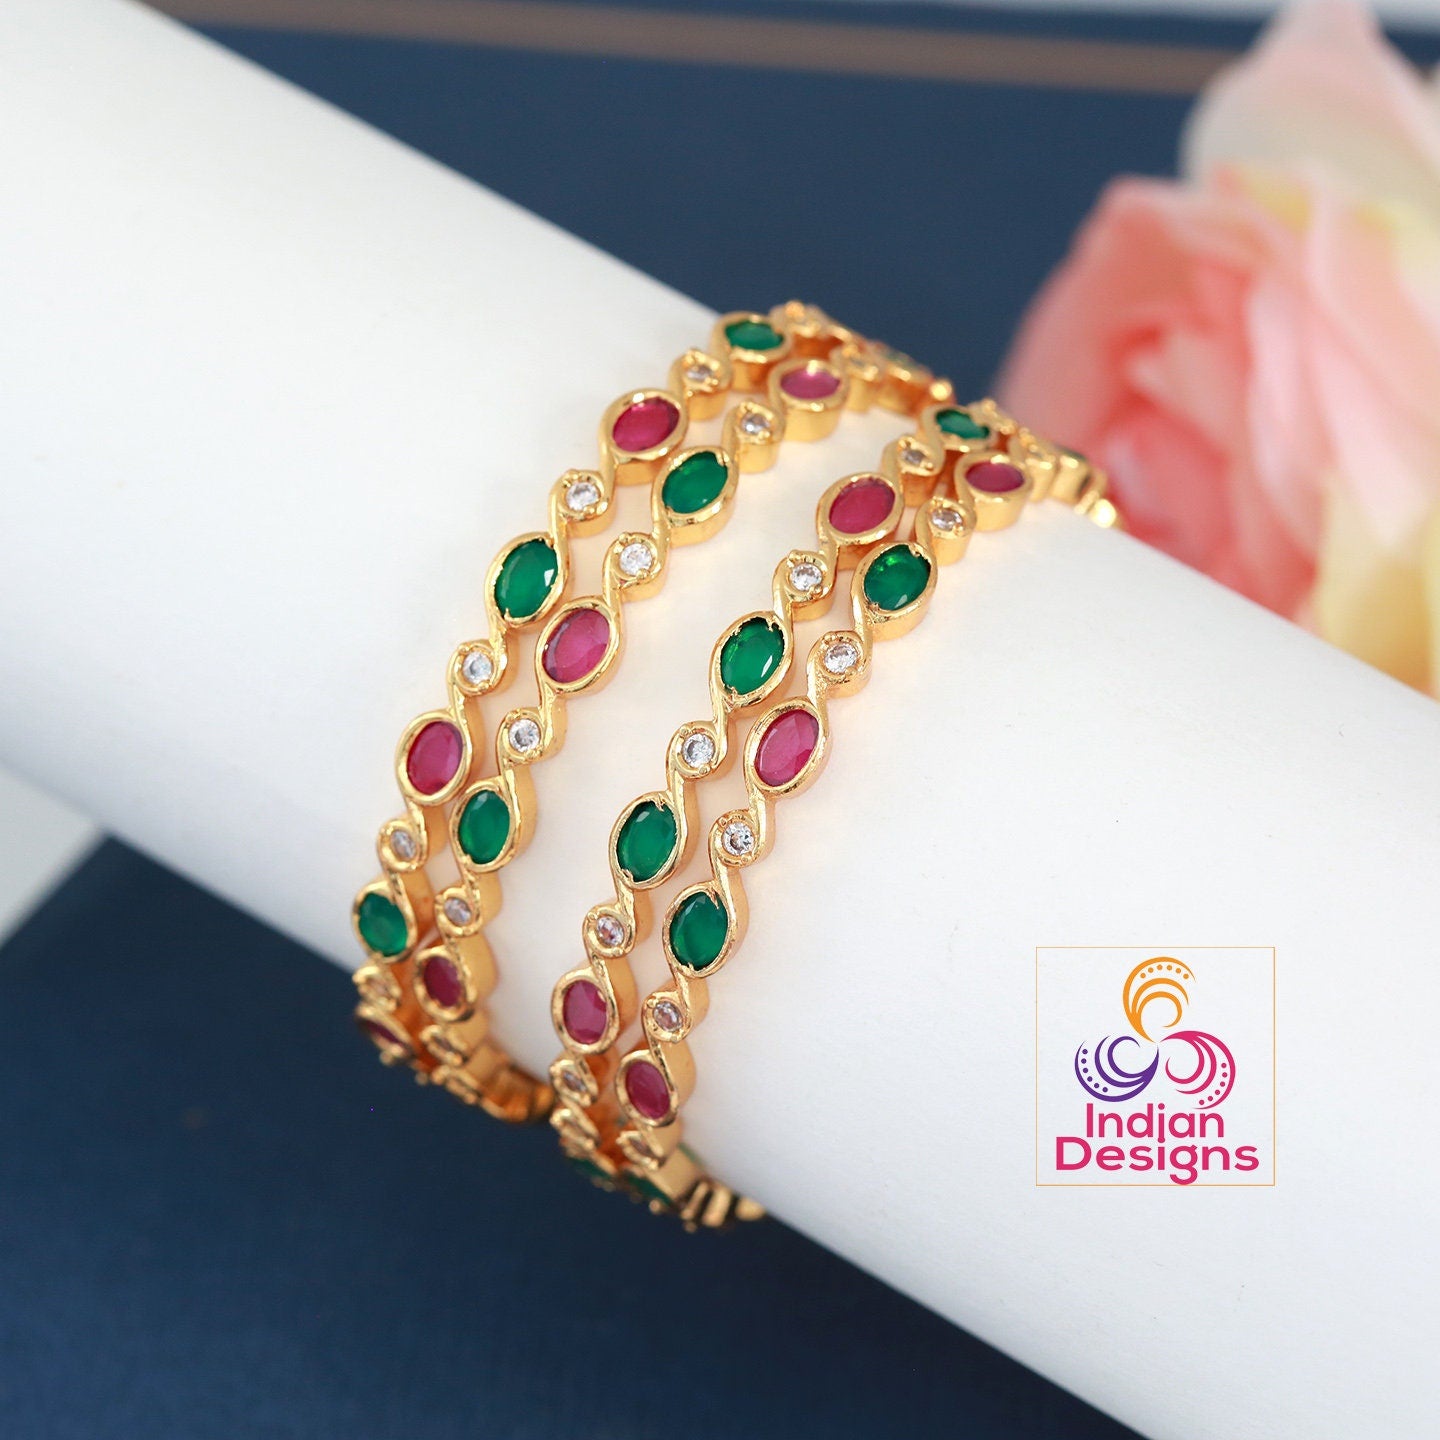 Indian Style 22K Gold Zircon Bangles Studded With Clear Ruby Pink Topaz  Cubic Zirconia - Etsy